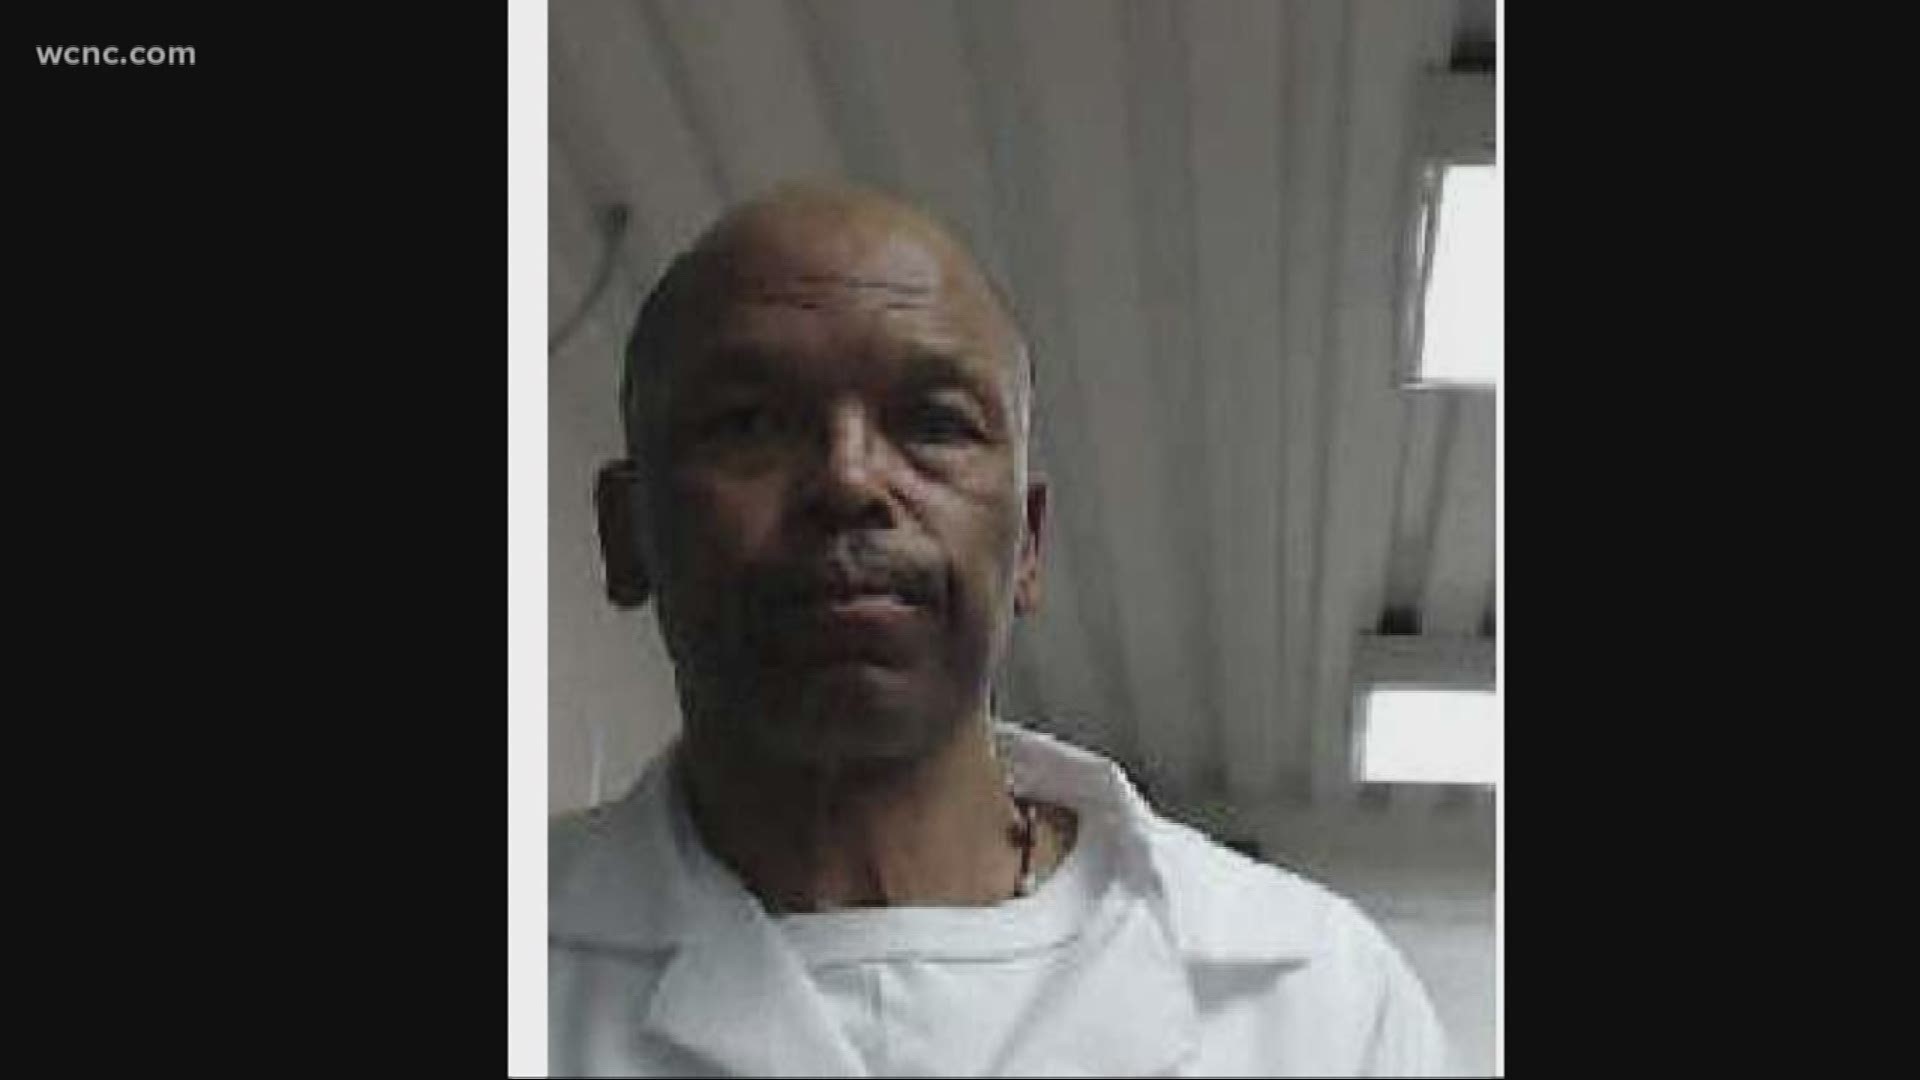 64 year-old Johnny Ealey is accused of two different rapes in 1981 on Beatties Ford Road.  The arrest is putting a spotlight on an issue the NBC Charlotte Defenders team has been investigating for years.  Our investigation found many rape kits went untested, but back in 2015, CMPD changed its policy requiring all kits be tested.